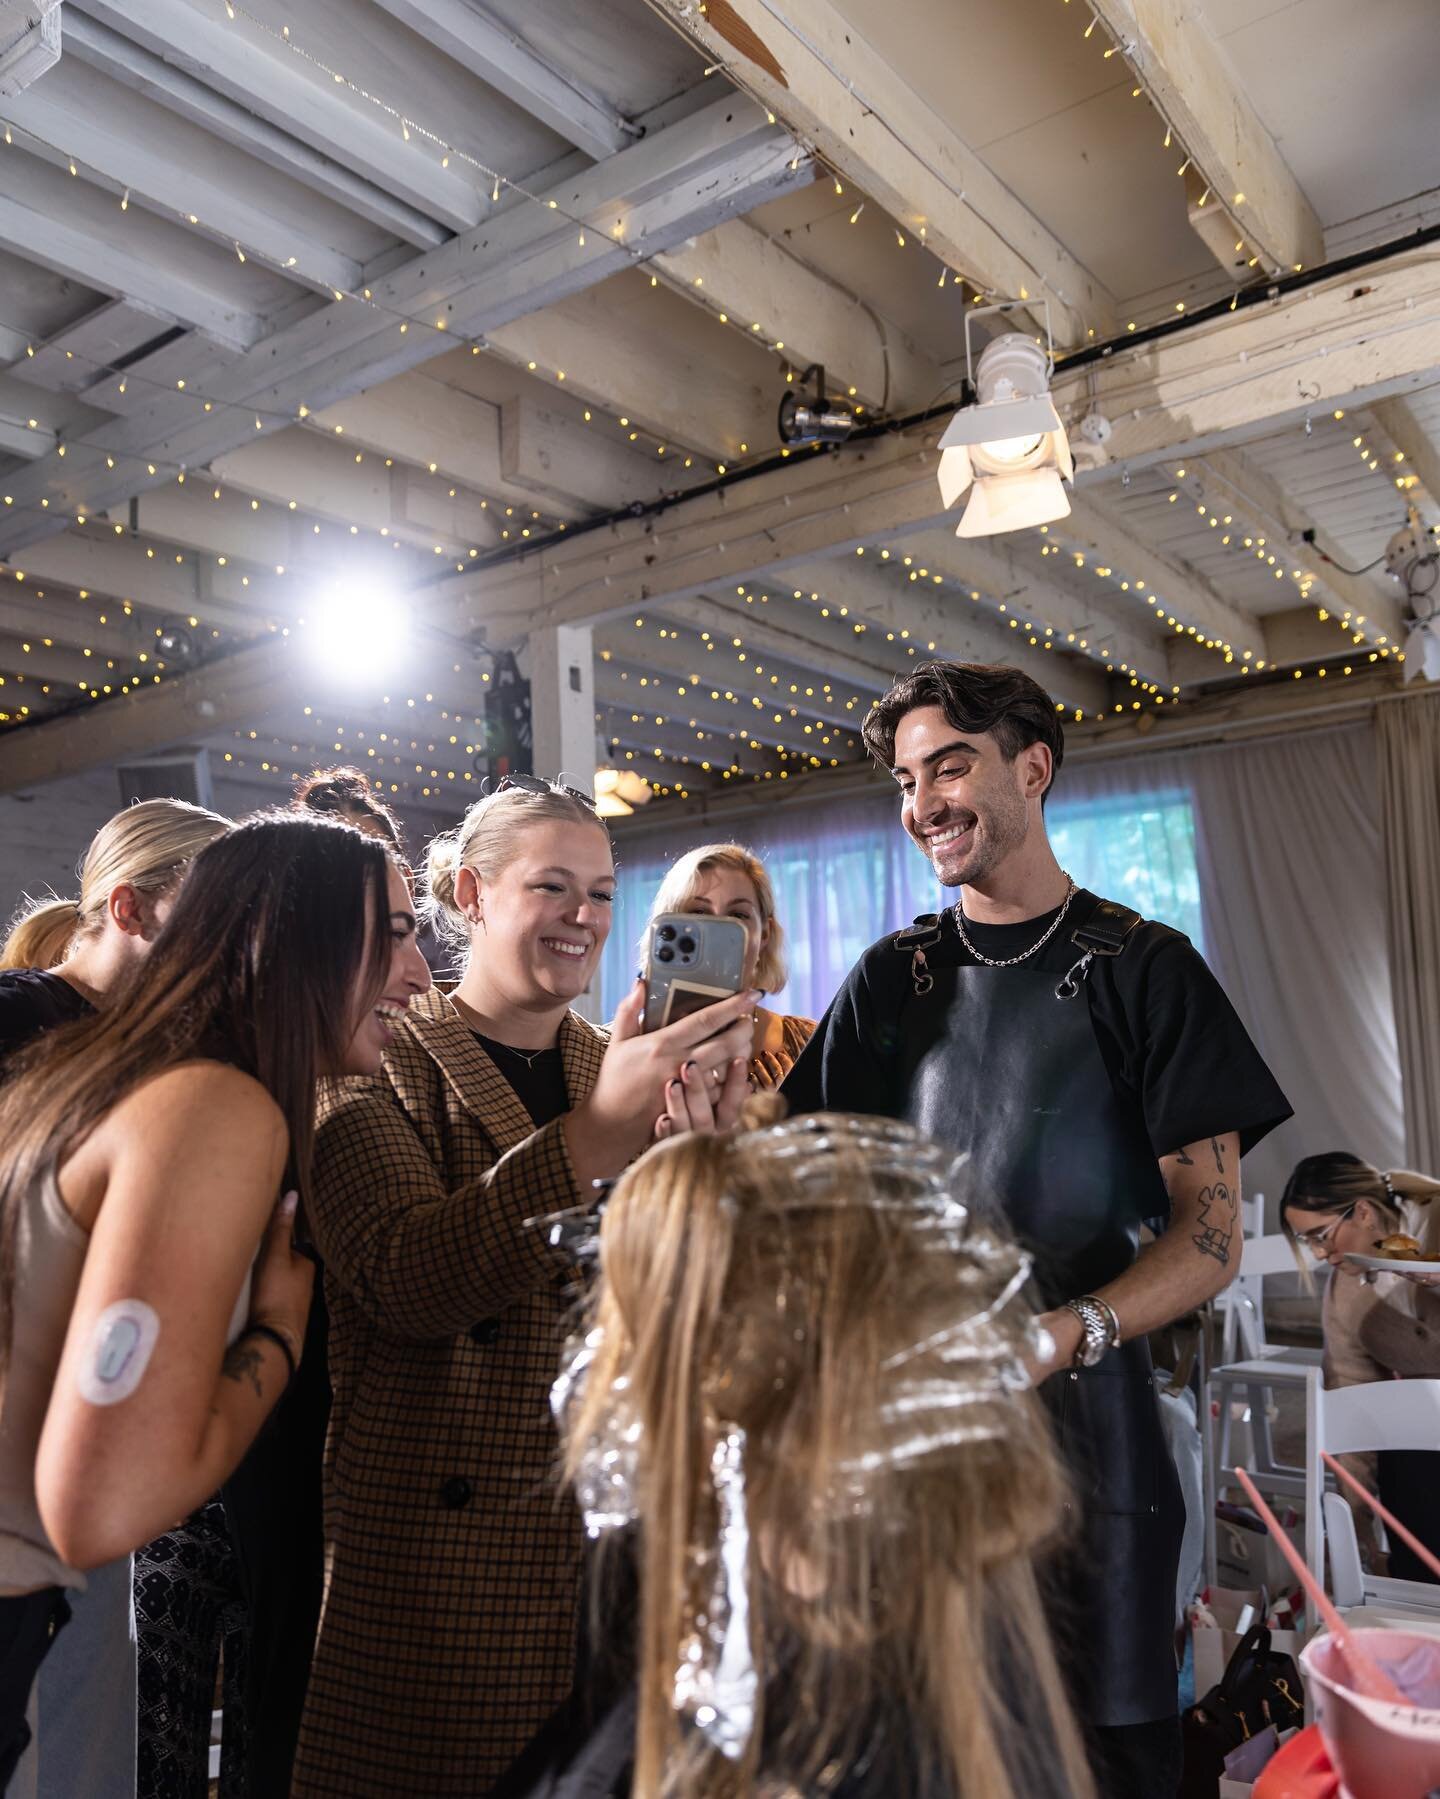 @michaelkellycolourist at work for #AUSSIEBLONDES with @originalmineral 💚

Monday was such an incredible day for our Hair &amp; Beauty Co. community, so much knowledge, so much talent, so much connection. 

Thank you Michael for sharing your experti